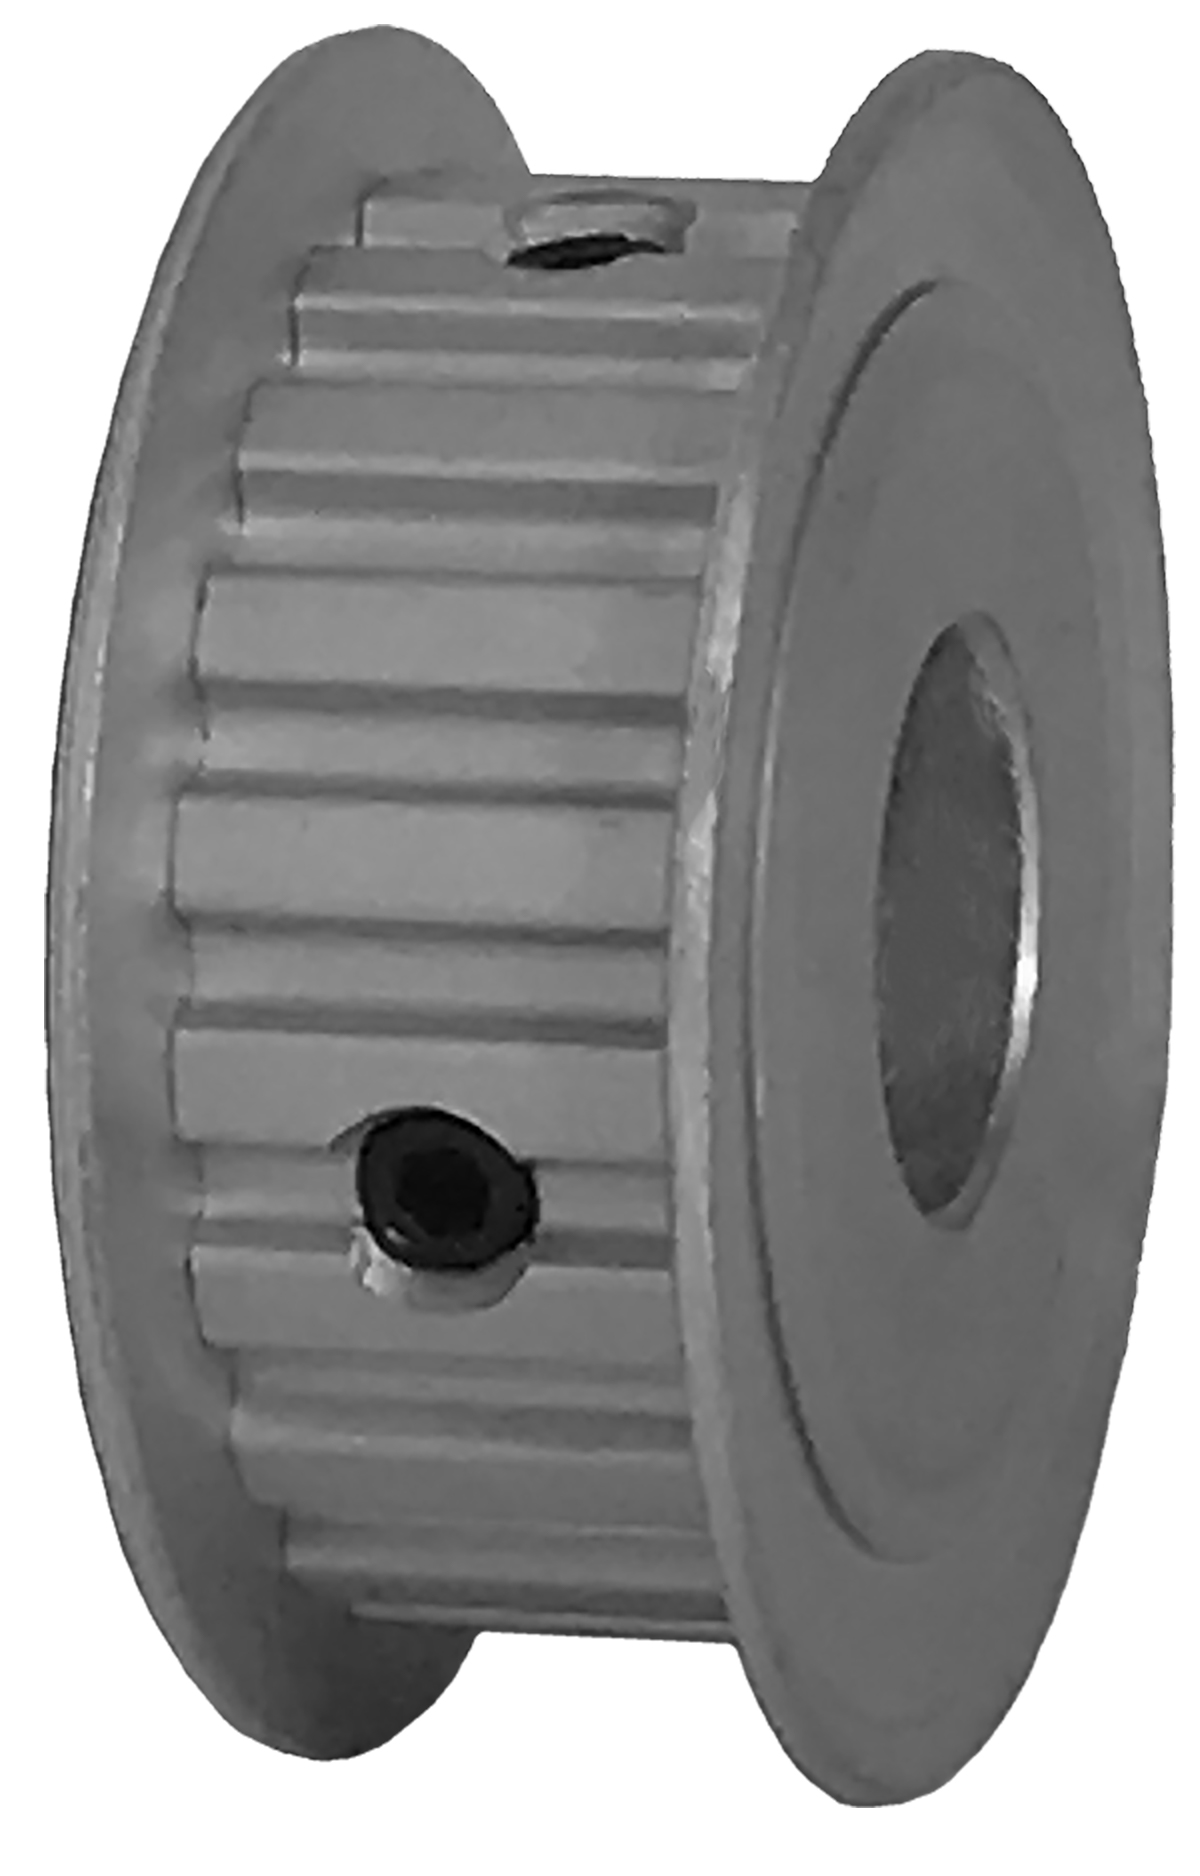 20XL037-3FA6 - Aluminum Imperial Pitch Pulleys